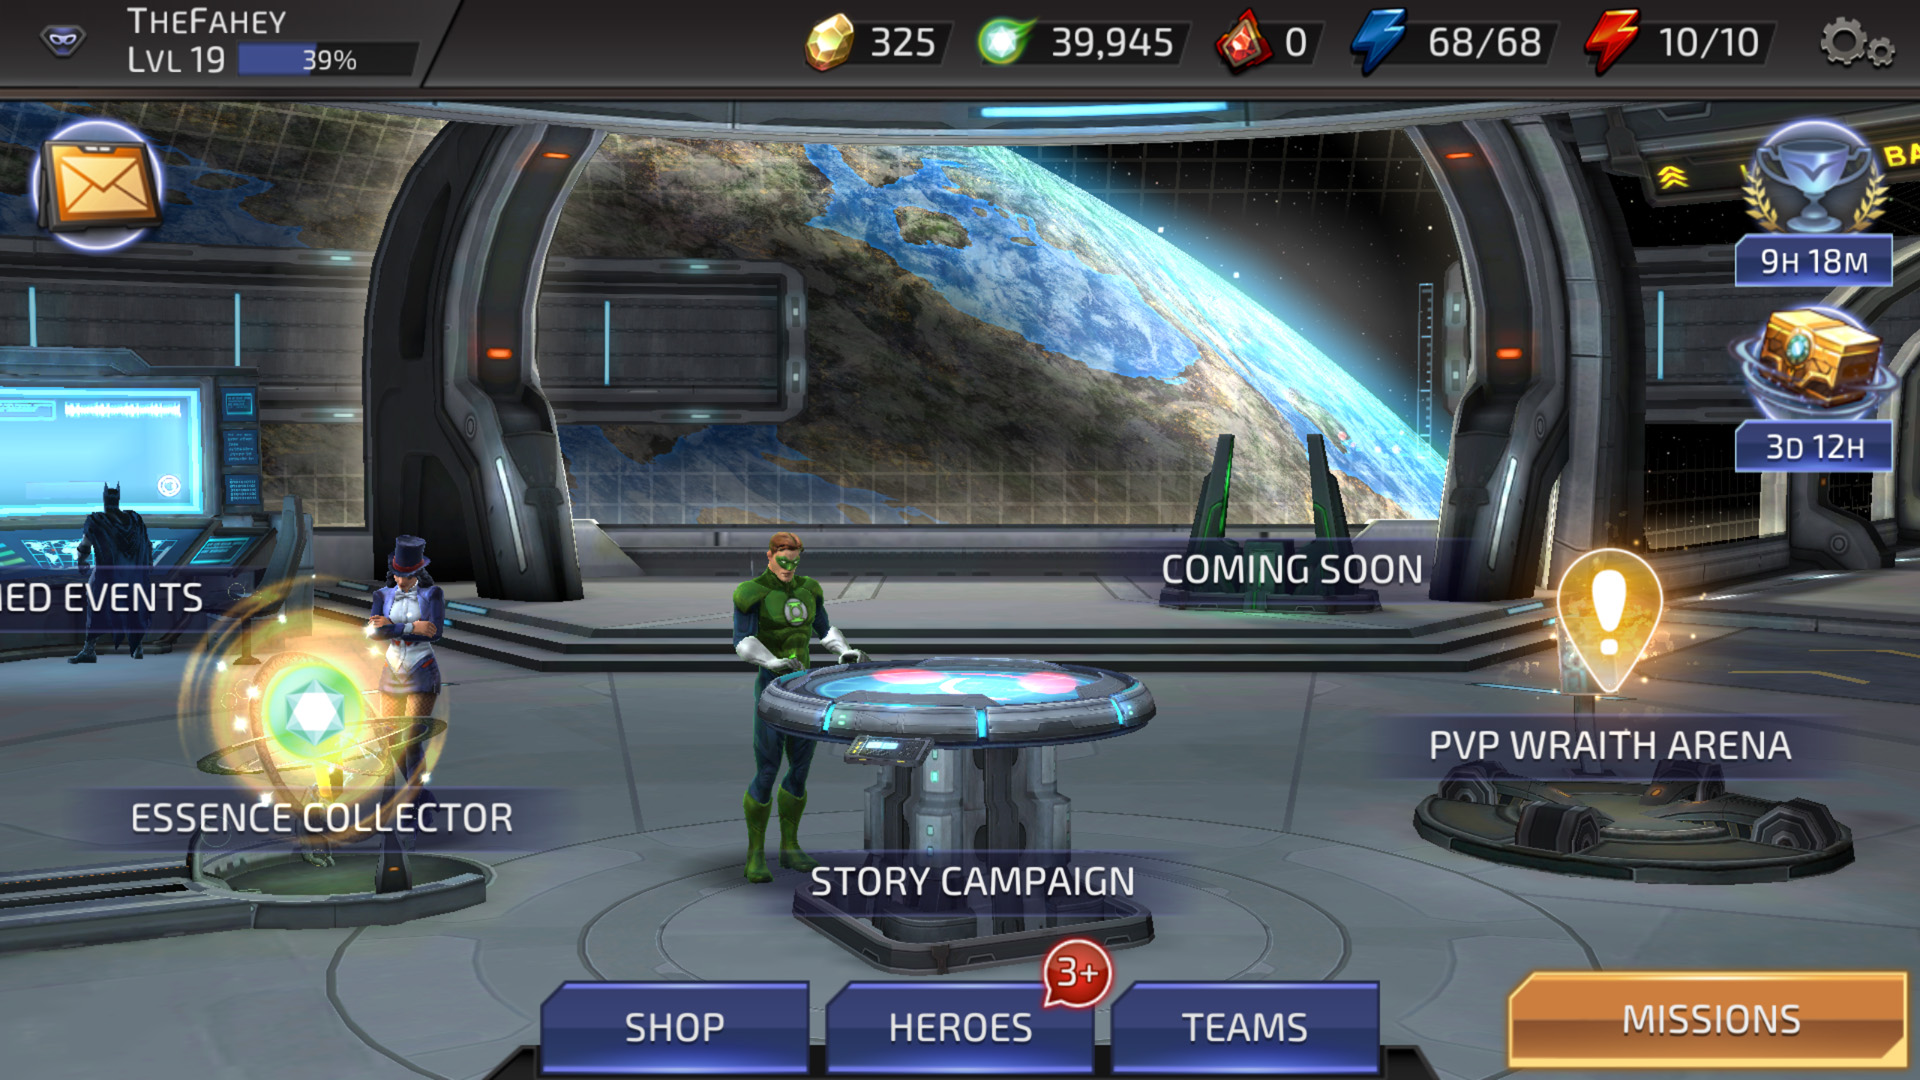 DC Legends Is Star Wars: Galaxy Of Heroes With A Story